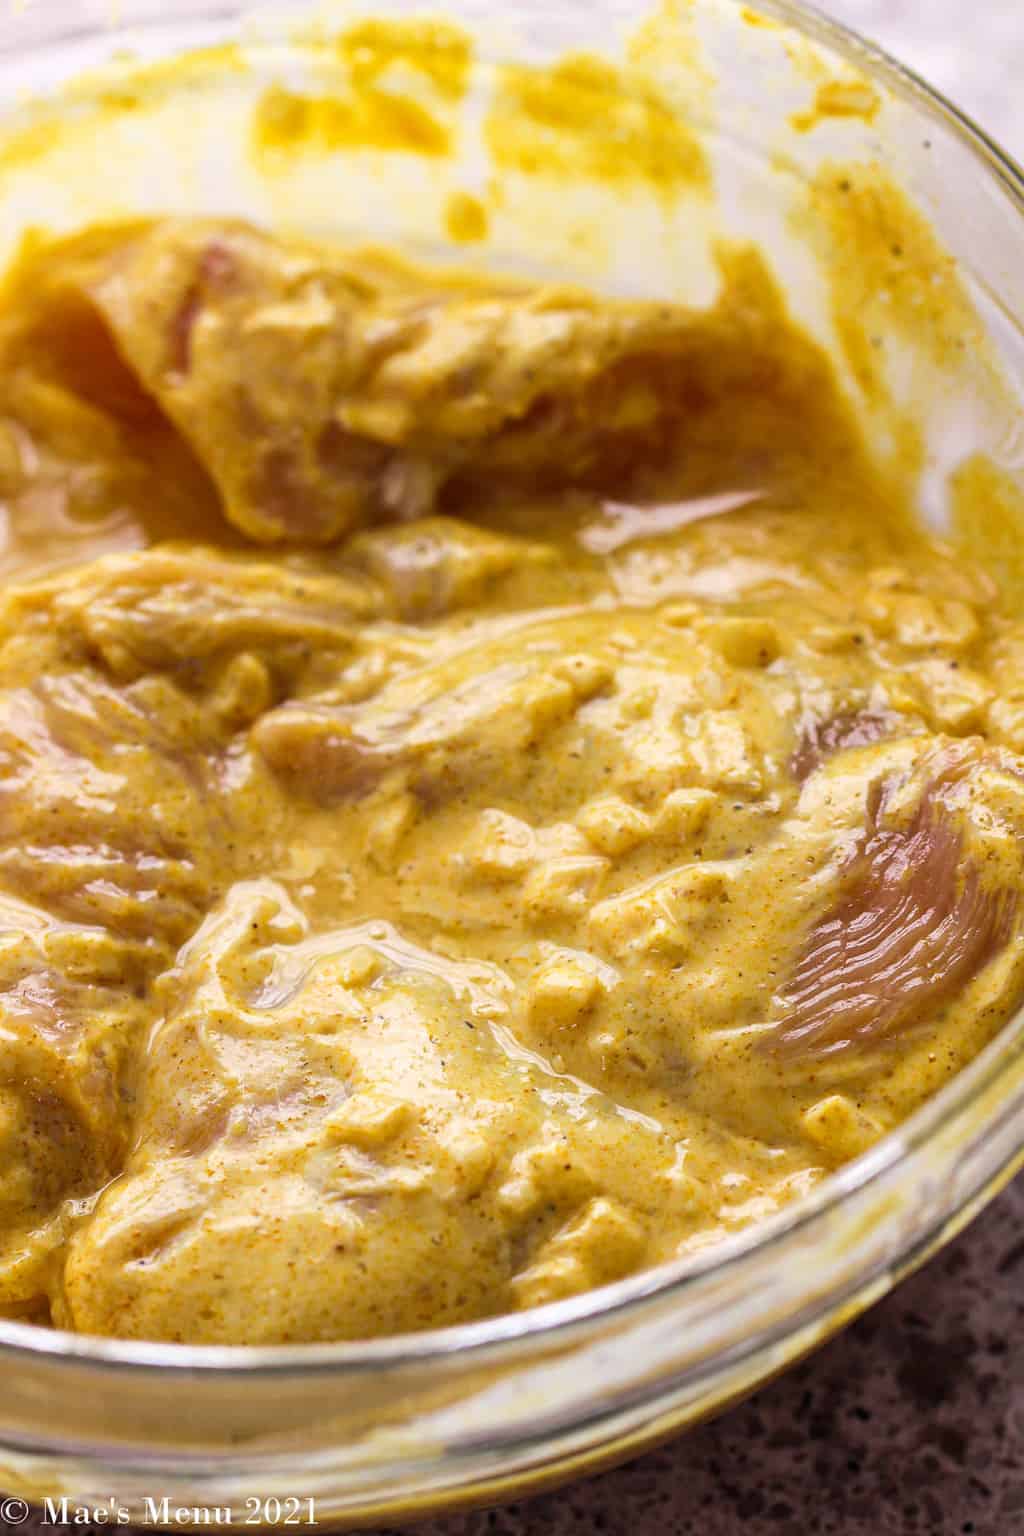 An up-close shot of a bowl of bowl of chicken marinating in yogurt